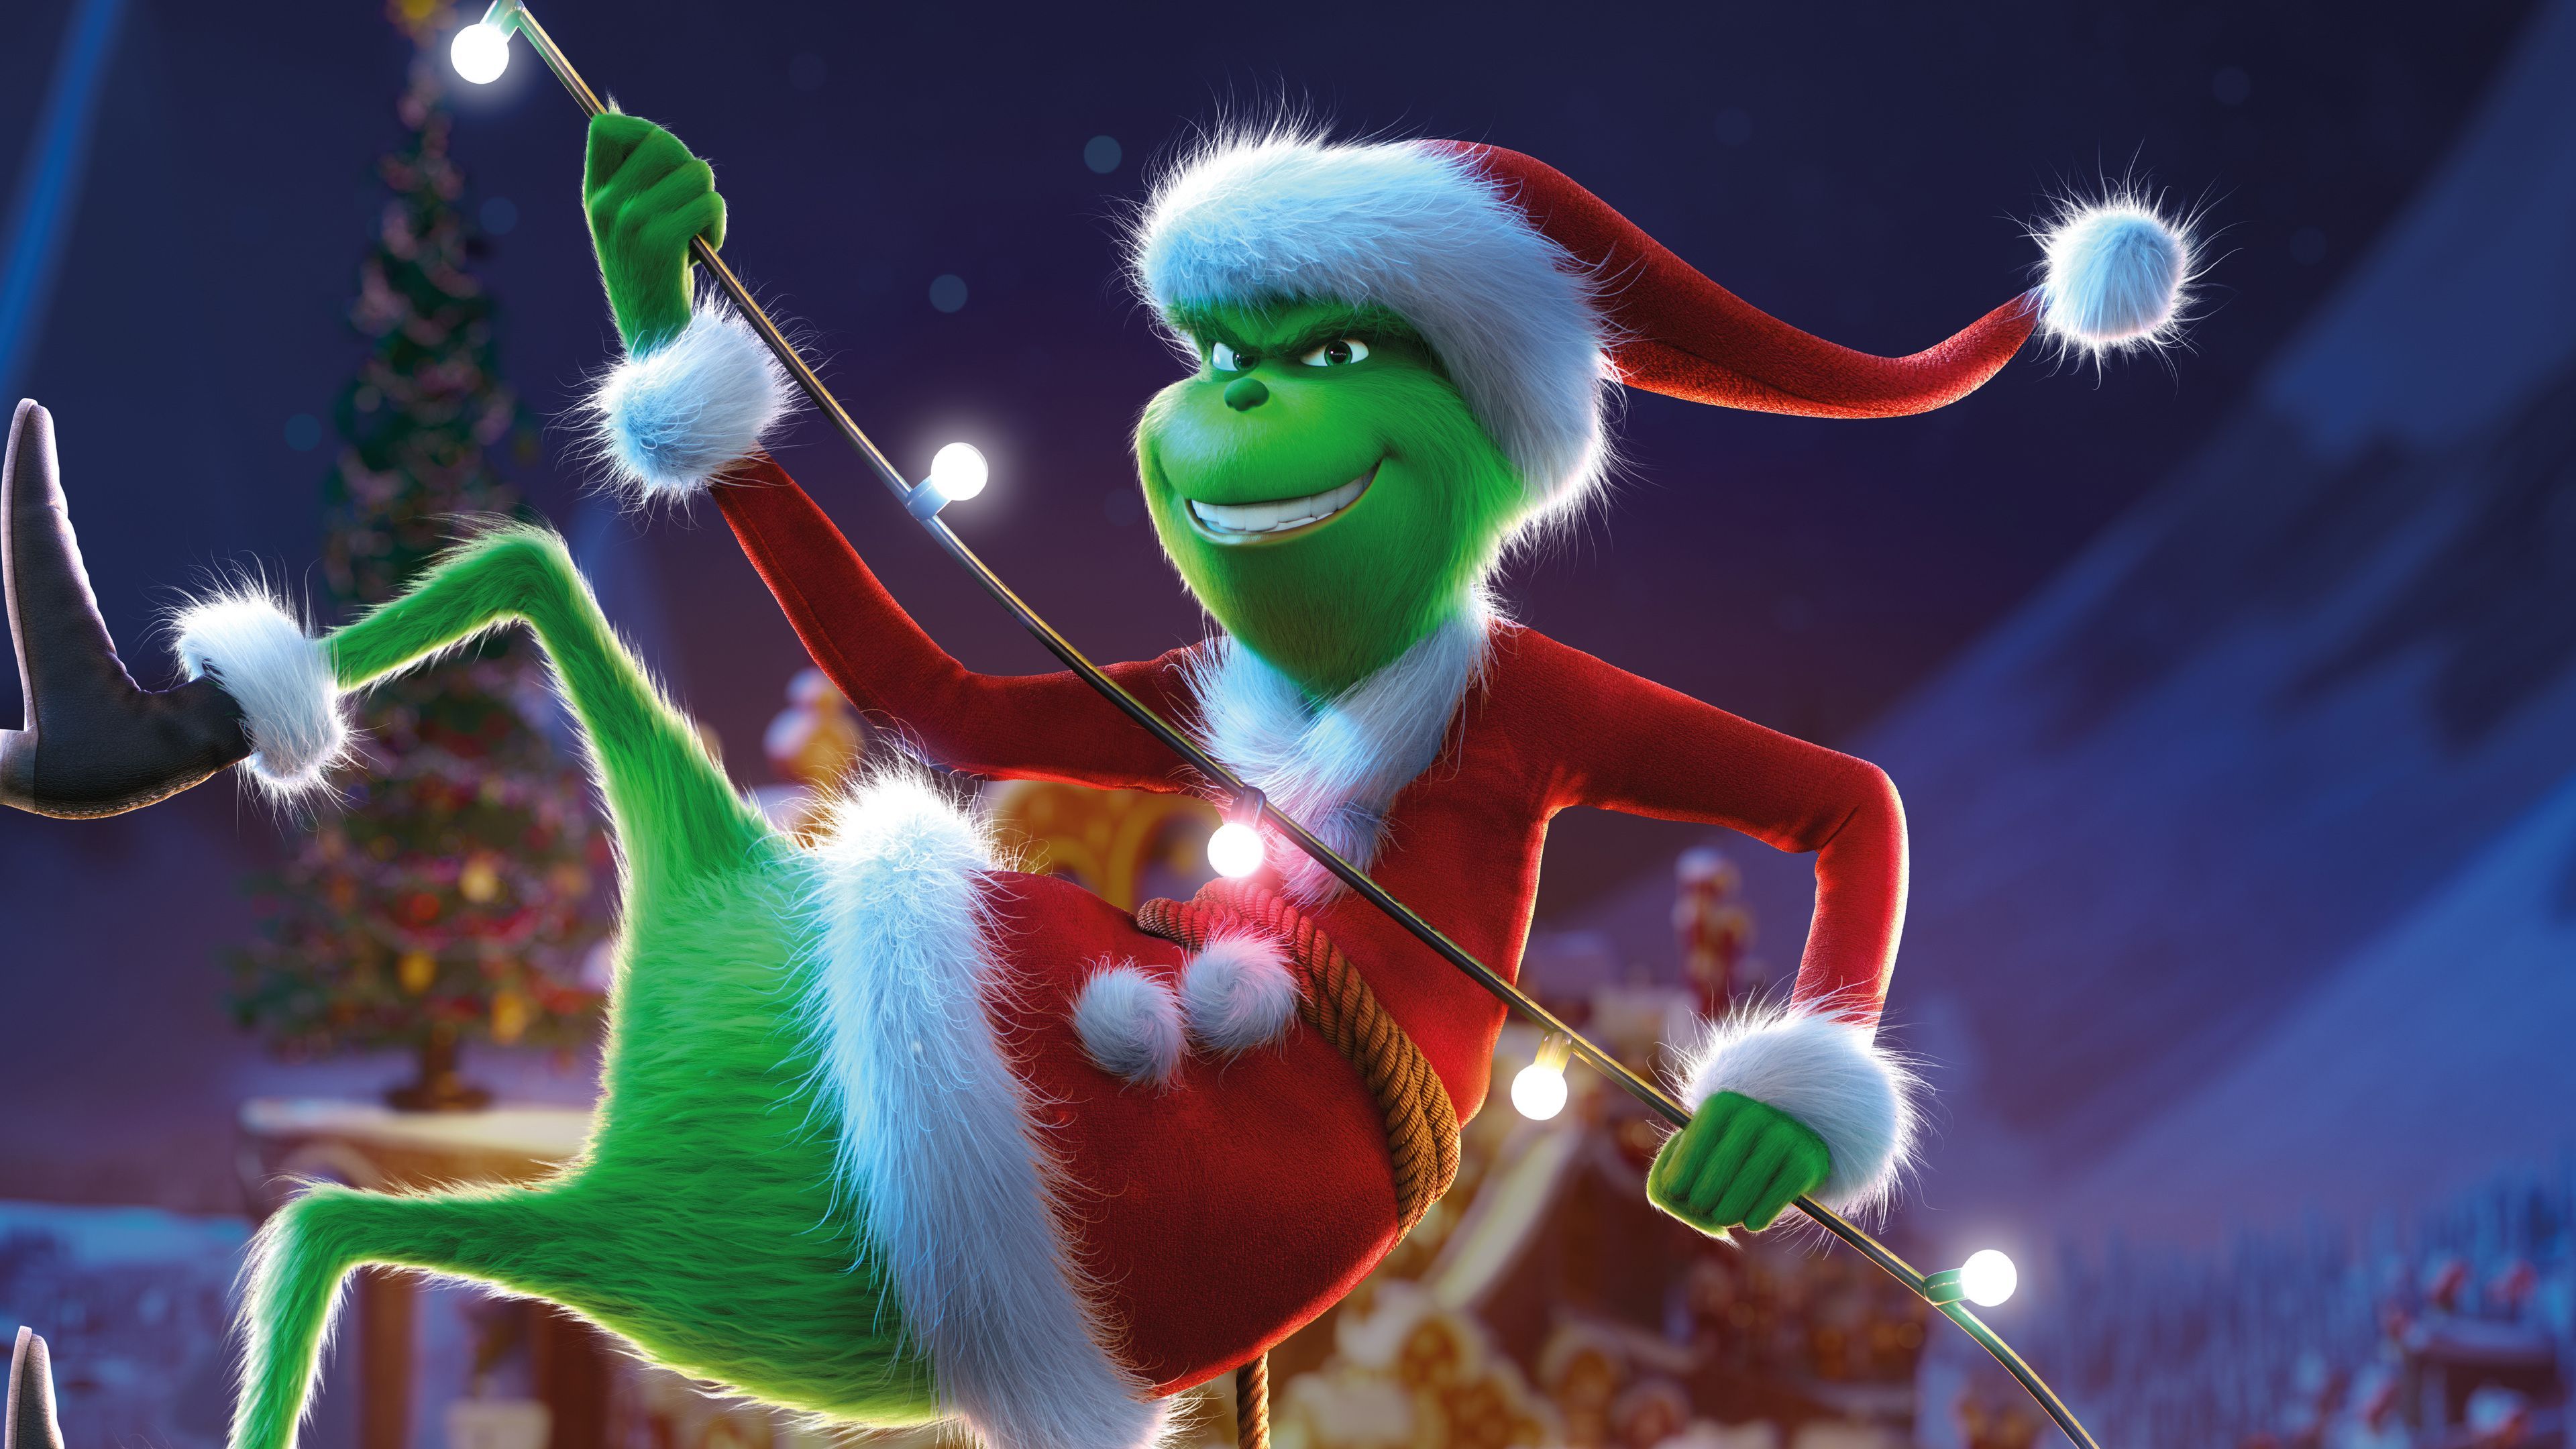 The Grinch 8k The Grinch Wallpaper, Movies Wallpaper, Hd Wallpaper, Animated Movies Wallpaper, 8k Wal. Wallpaper Iphone Christmas, Christmas Wallpaper, Grinch